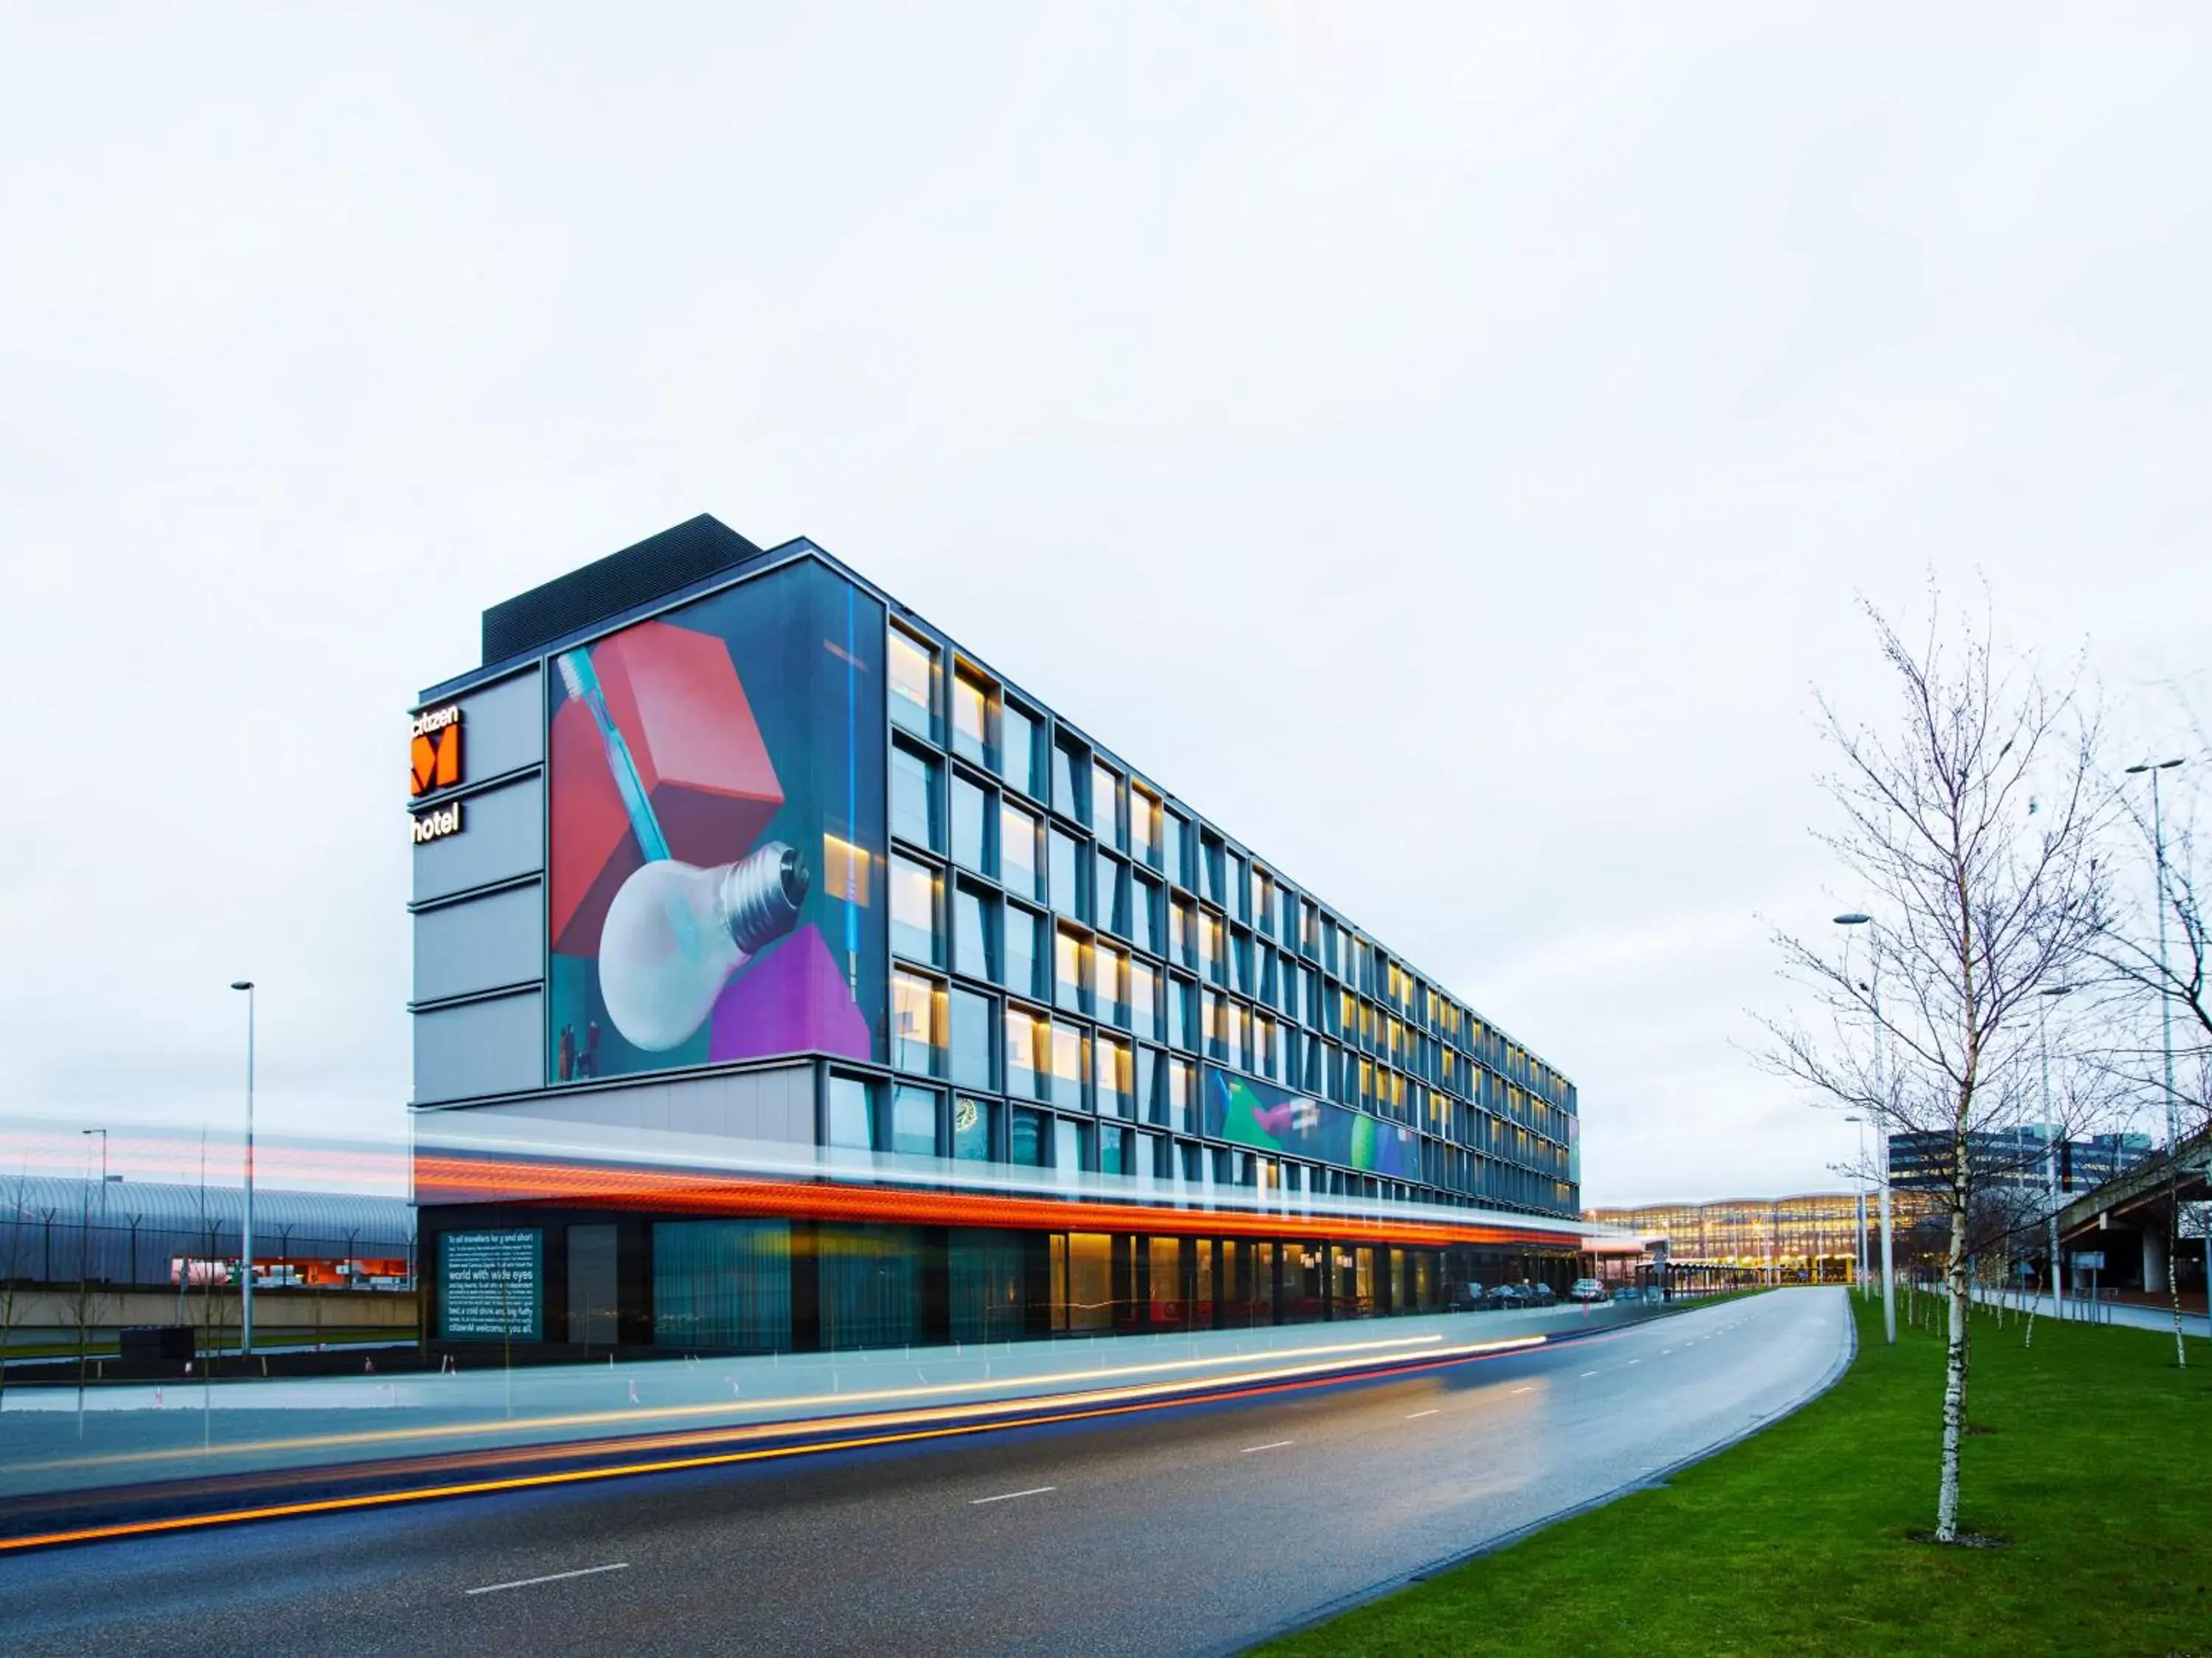 Property building in citizenM Schiphol Airport